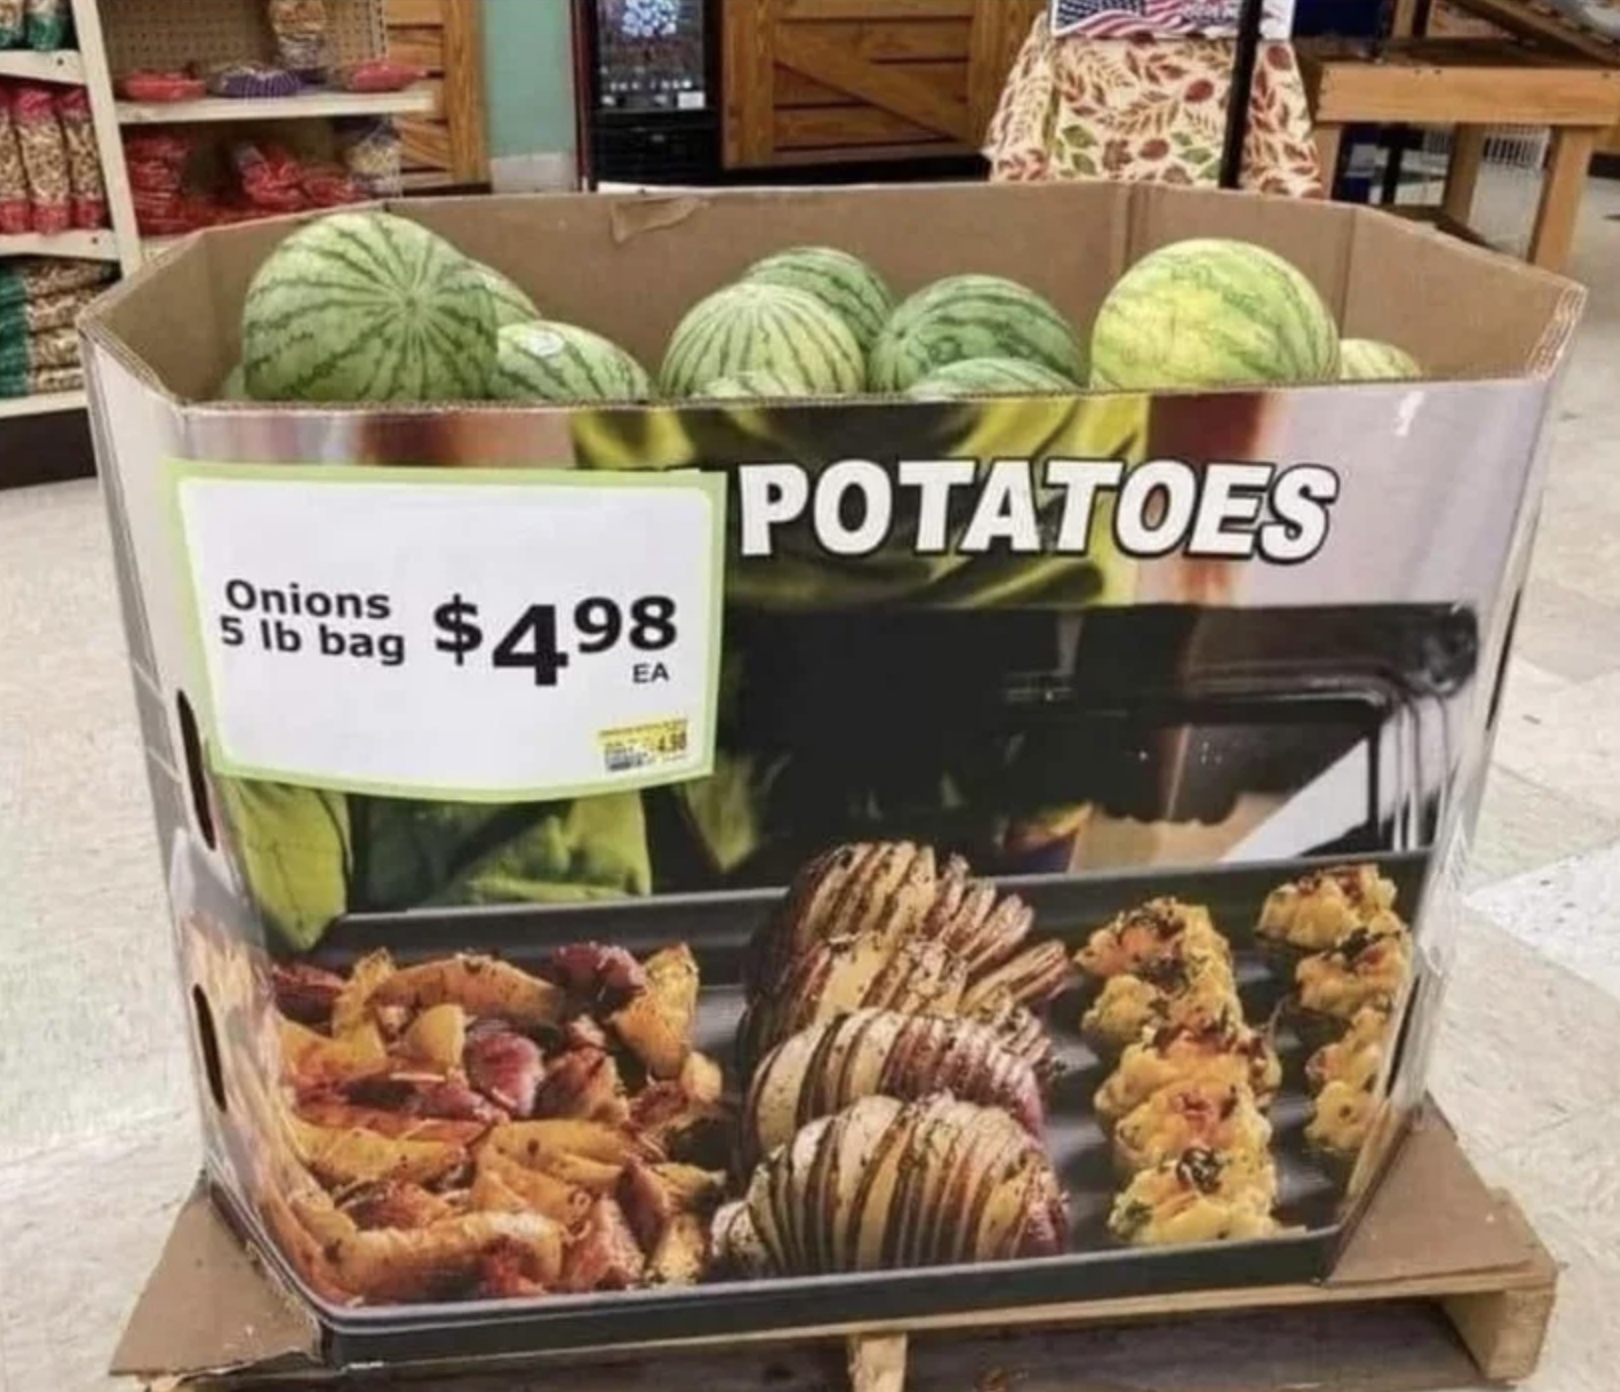 Bin with &quot;Onions: 5 lb bag $5 each&quot; and &quot;Potatoes&quot; written on it, with whole watermelons in it